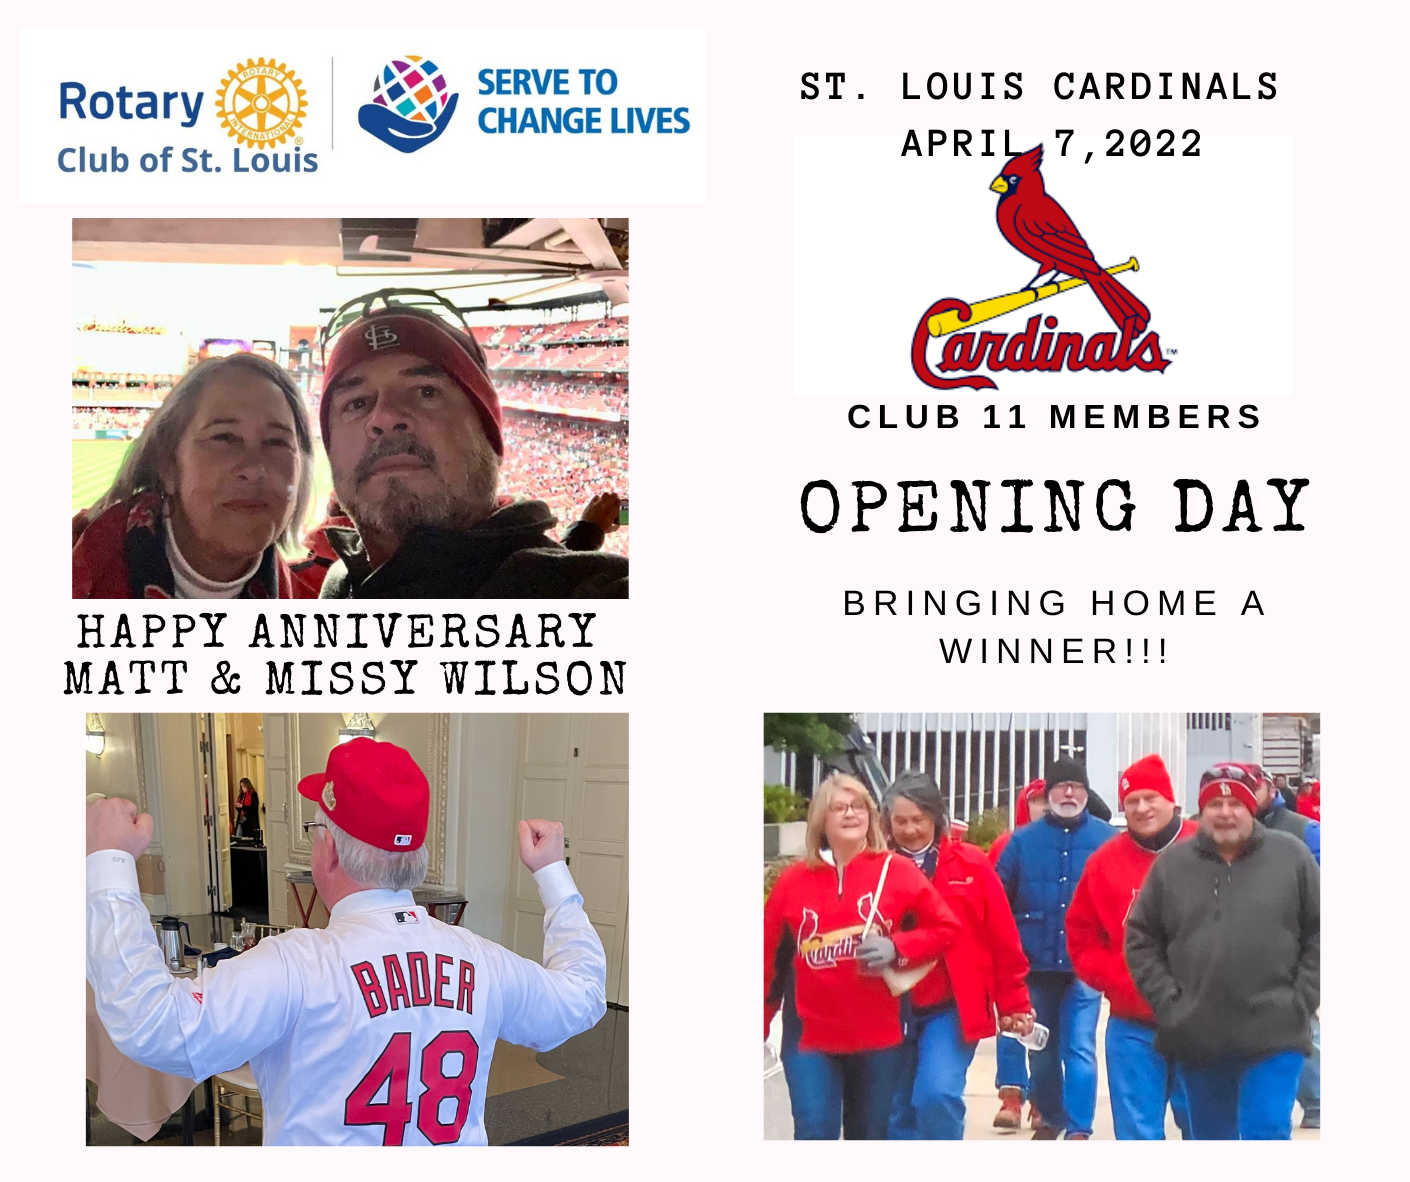 Cardinals Opening Day 2022 Facebook Post r1